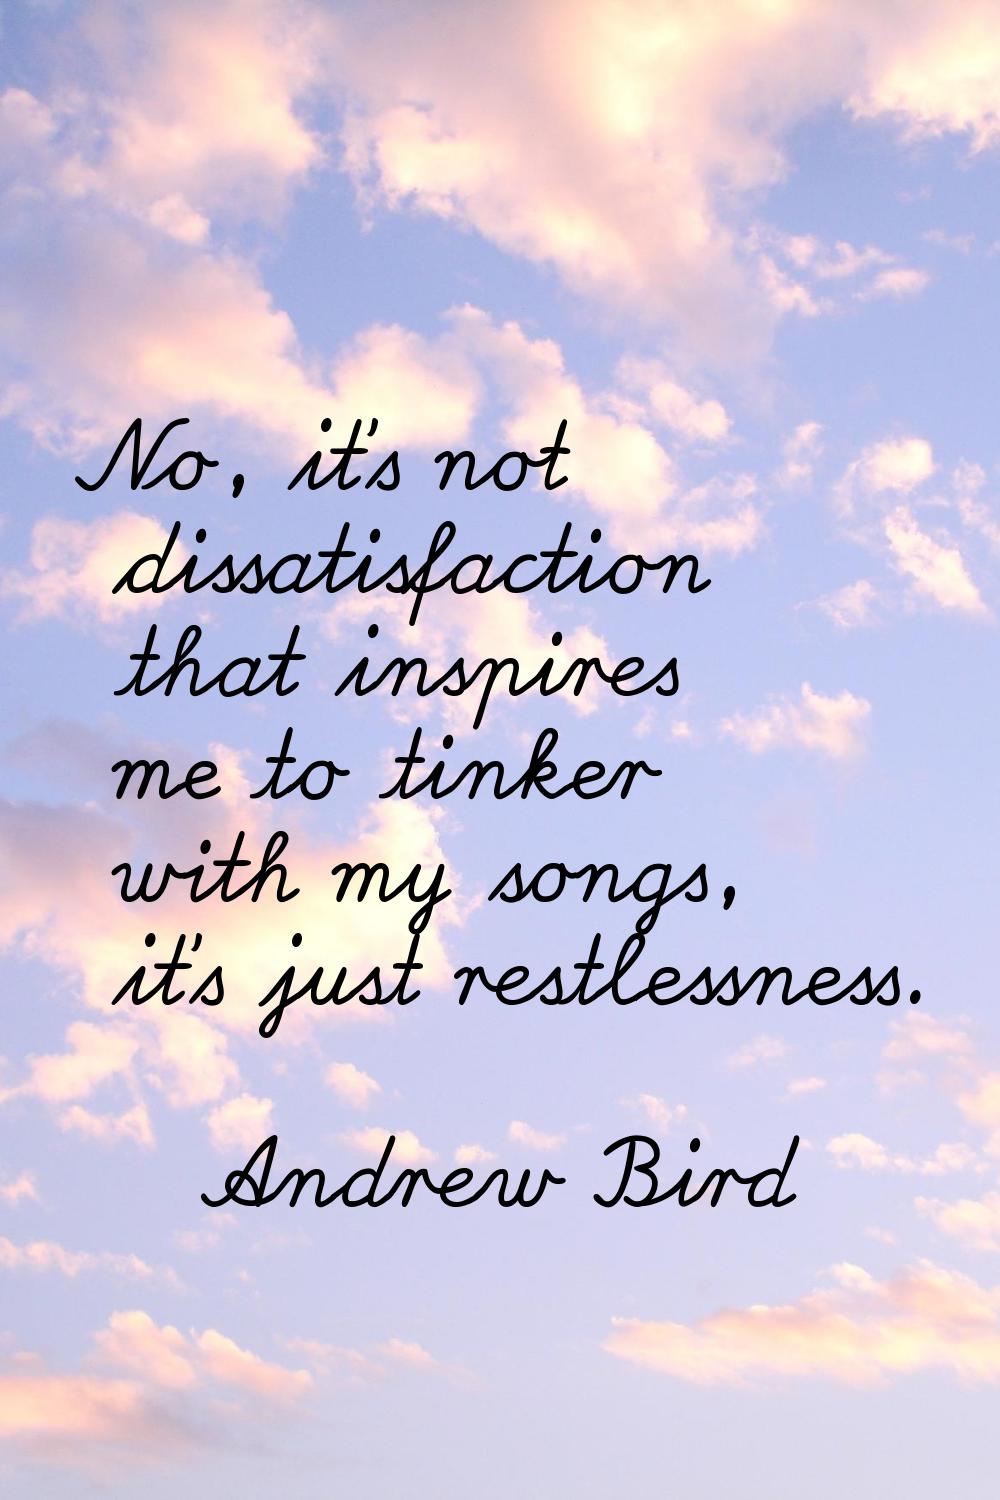 No, it's not dissatisfaction that inspires me to tinker with my songs, it's just restlessness.